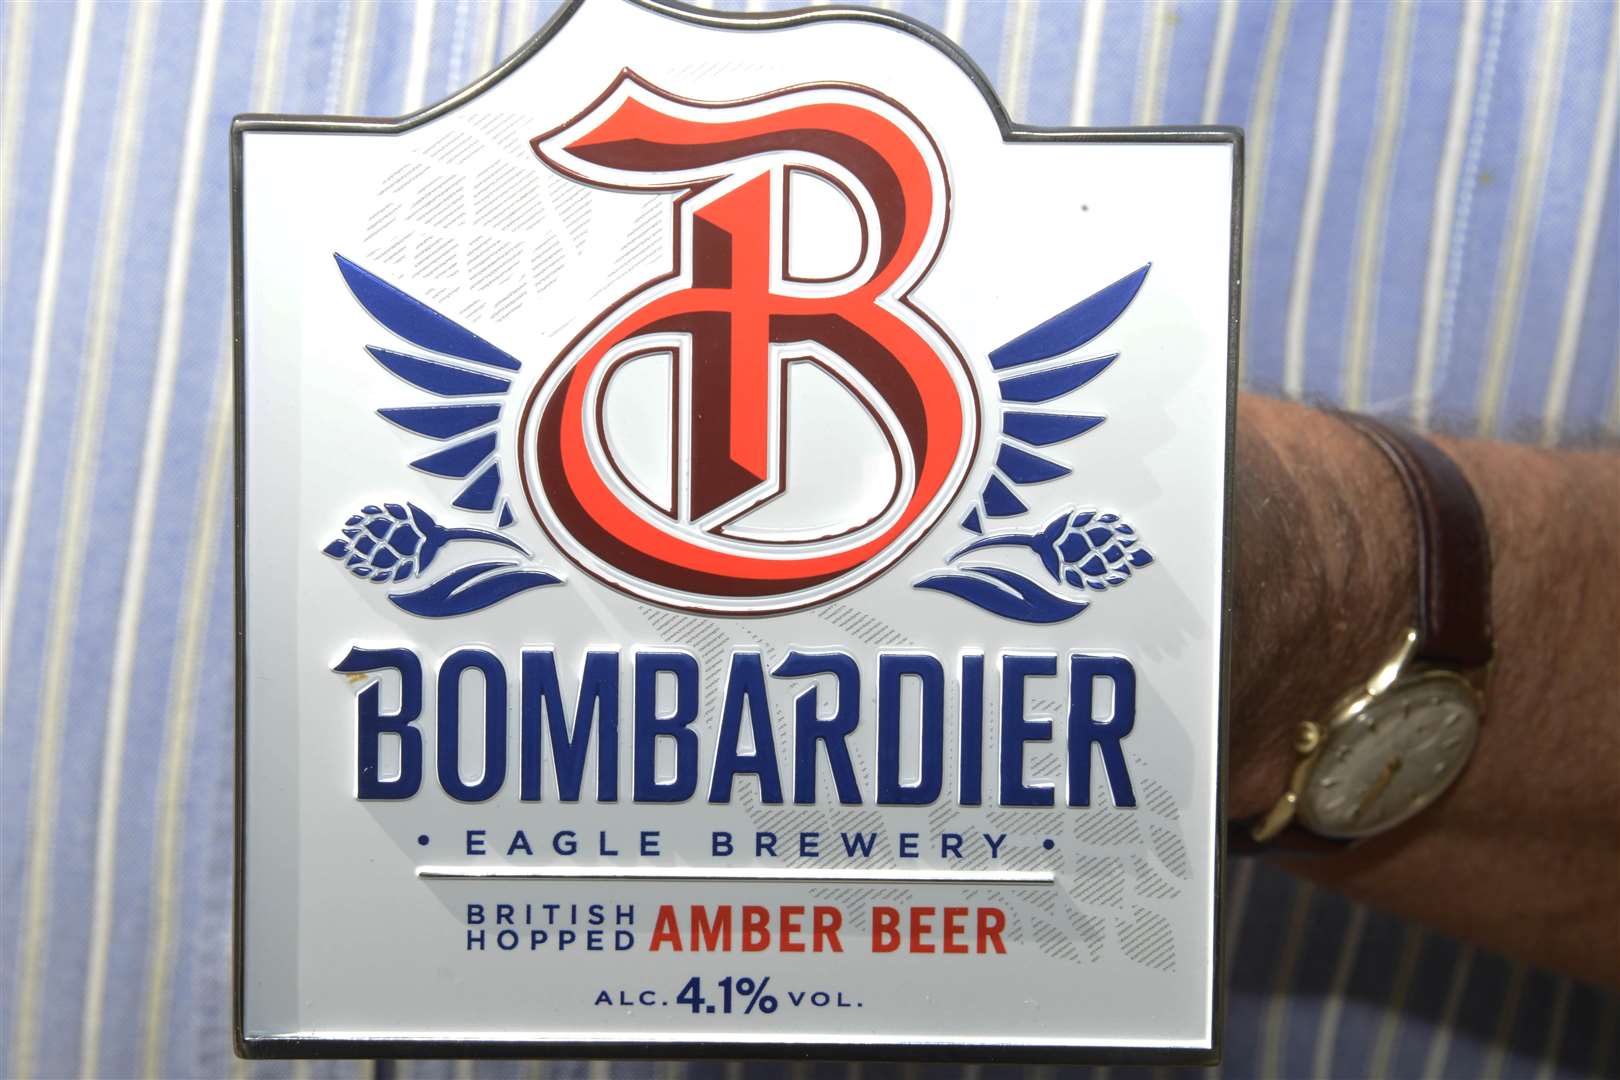 The new Bombardier branding. Picture: Paul Amos